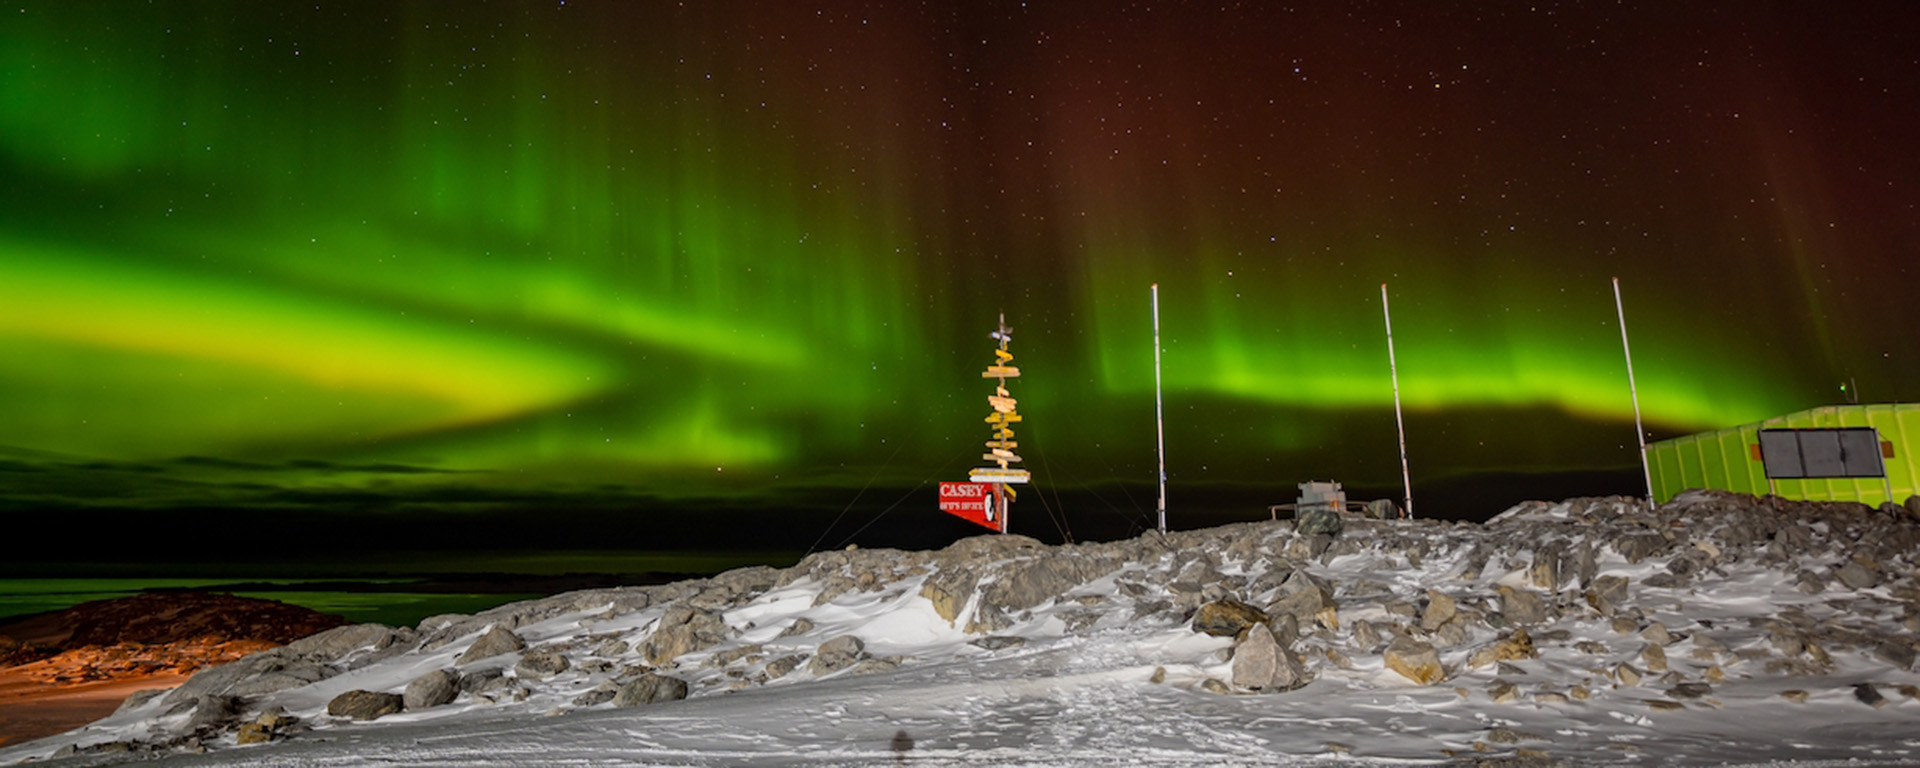 The Aurora Australis in the sky above a signpost, flagpoles and a shed. It appears like lakes and bands of green light, fading through dull red on their upper edges into a starry night sky.